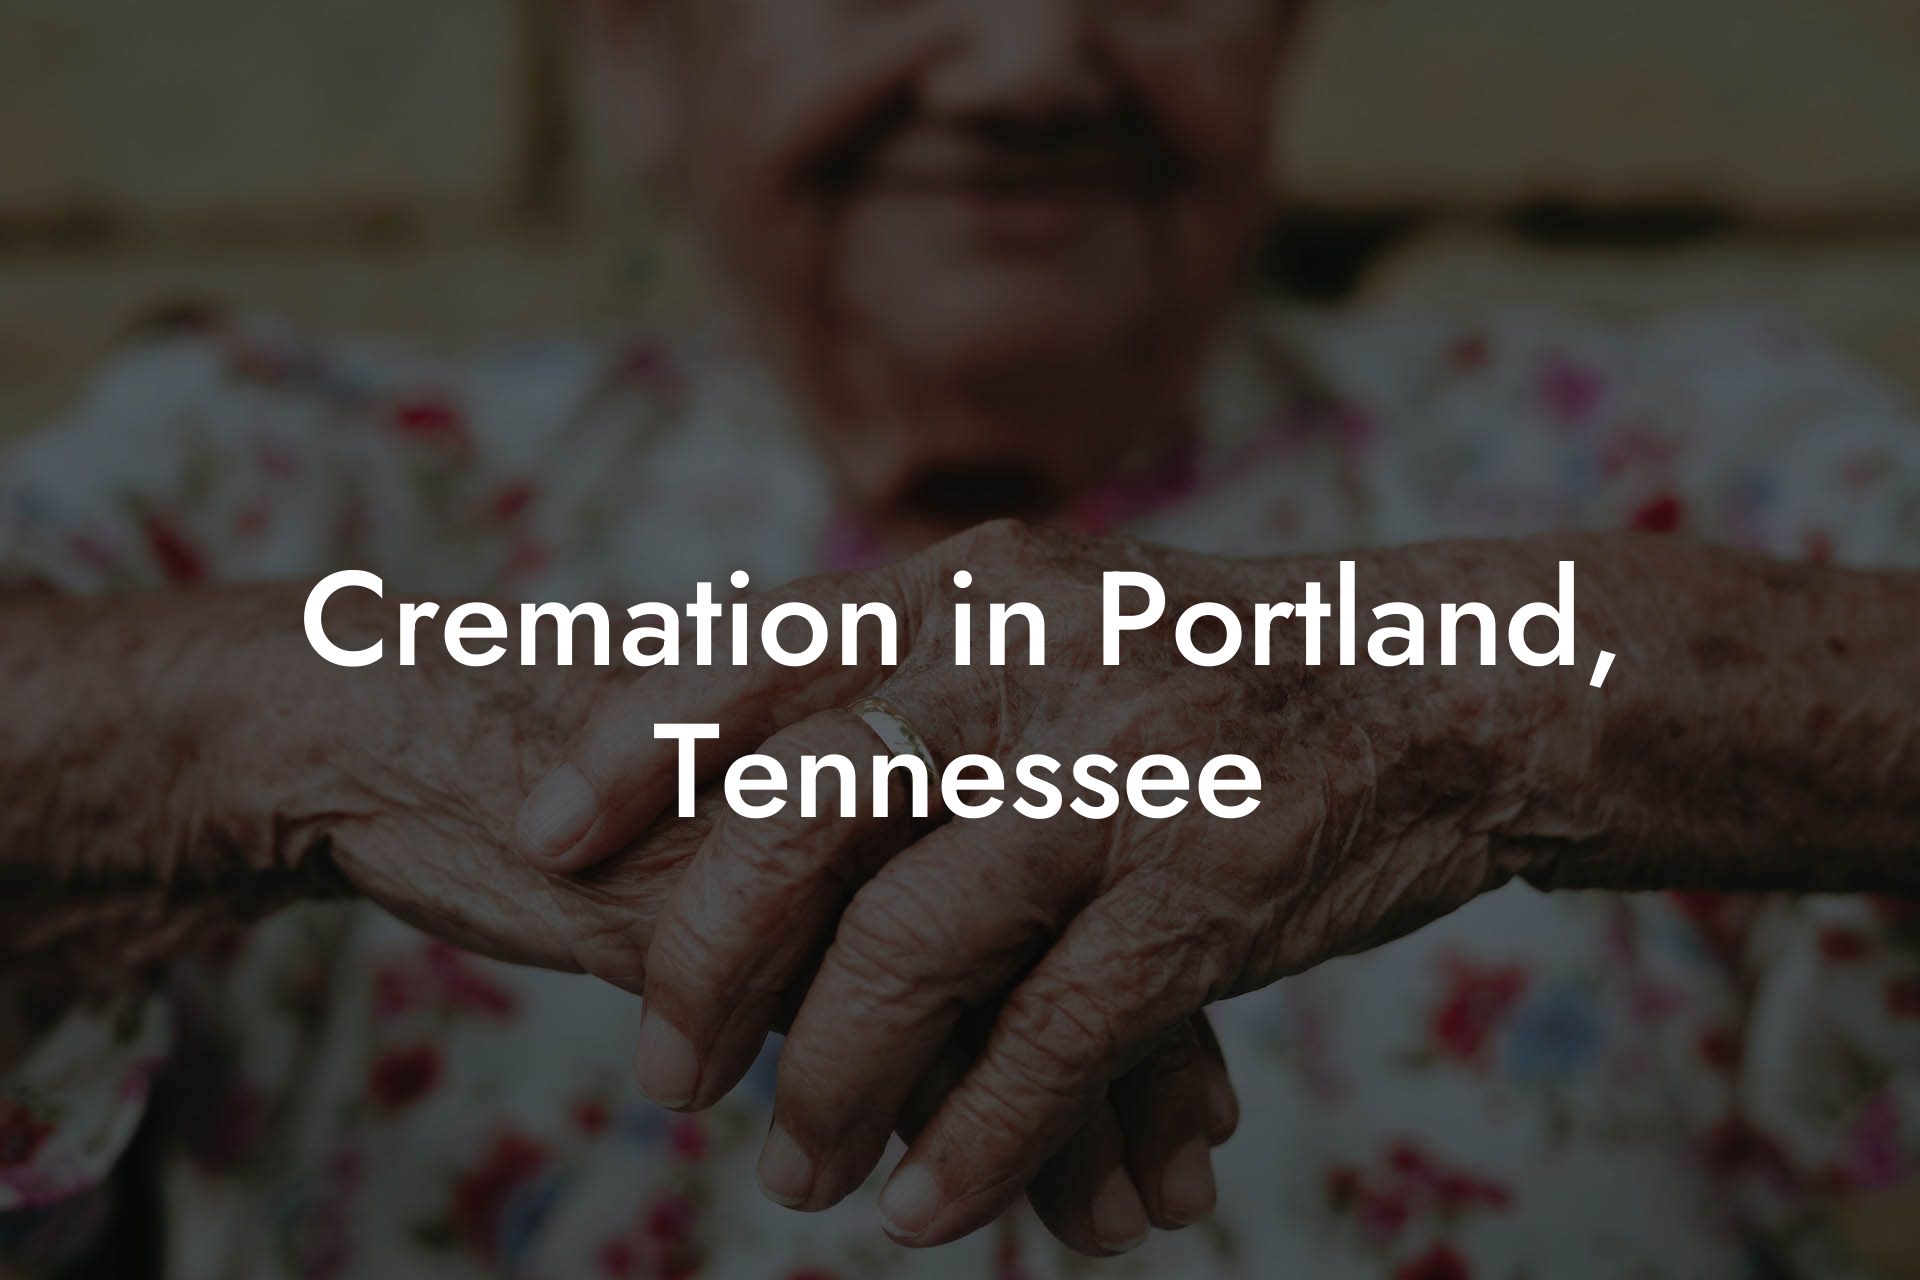 Cremation in Portland, Tennessee